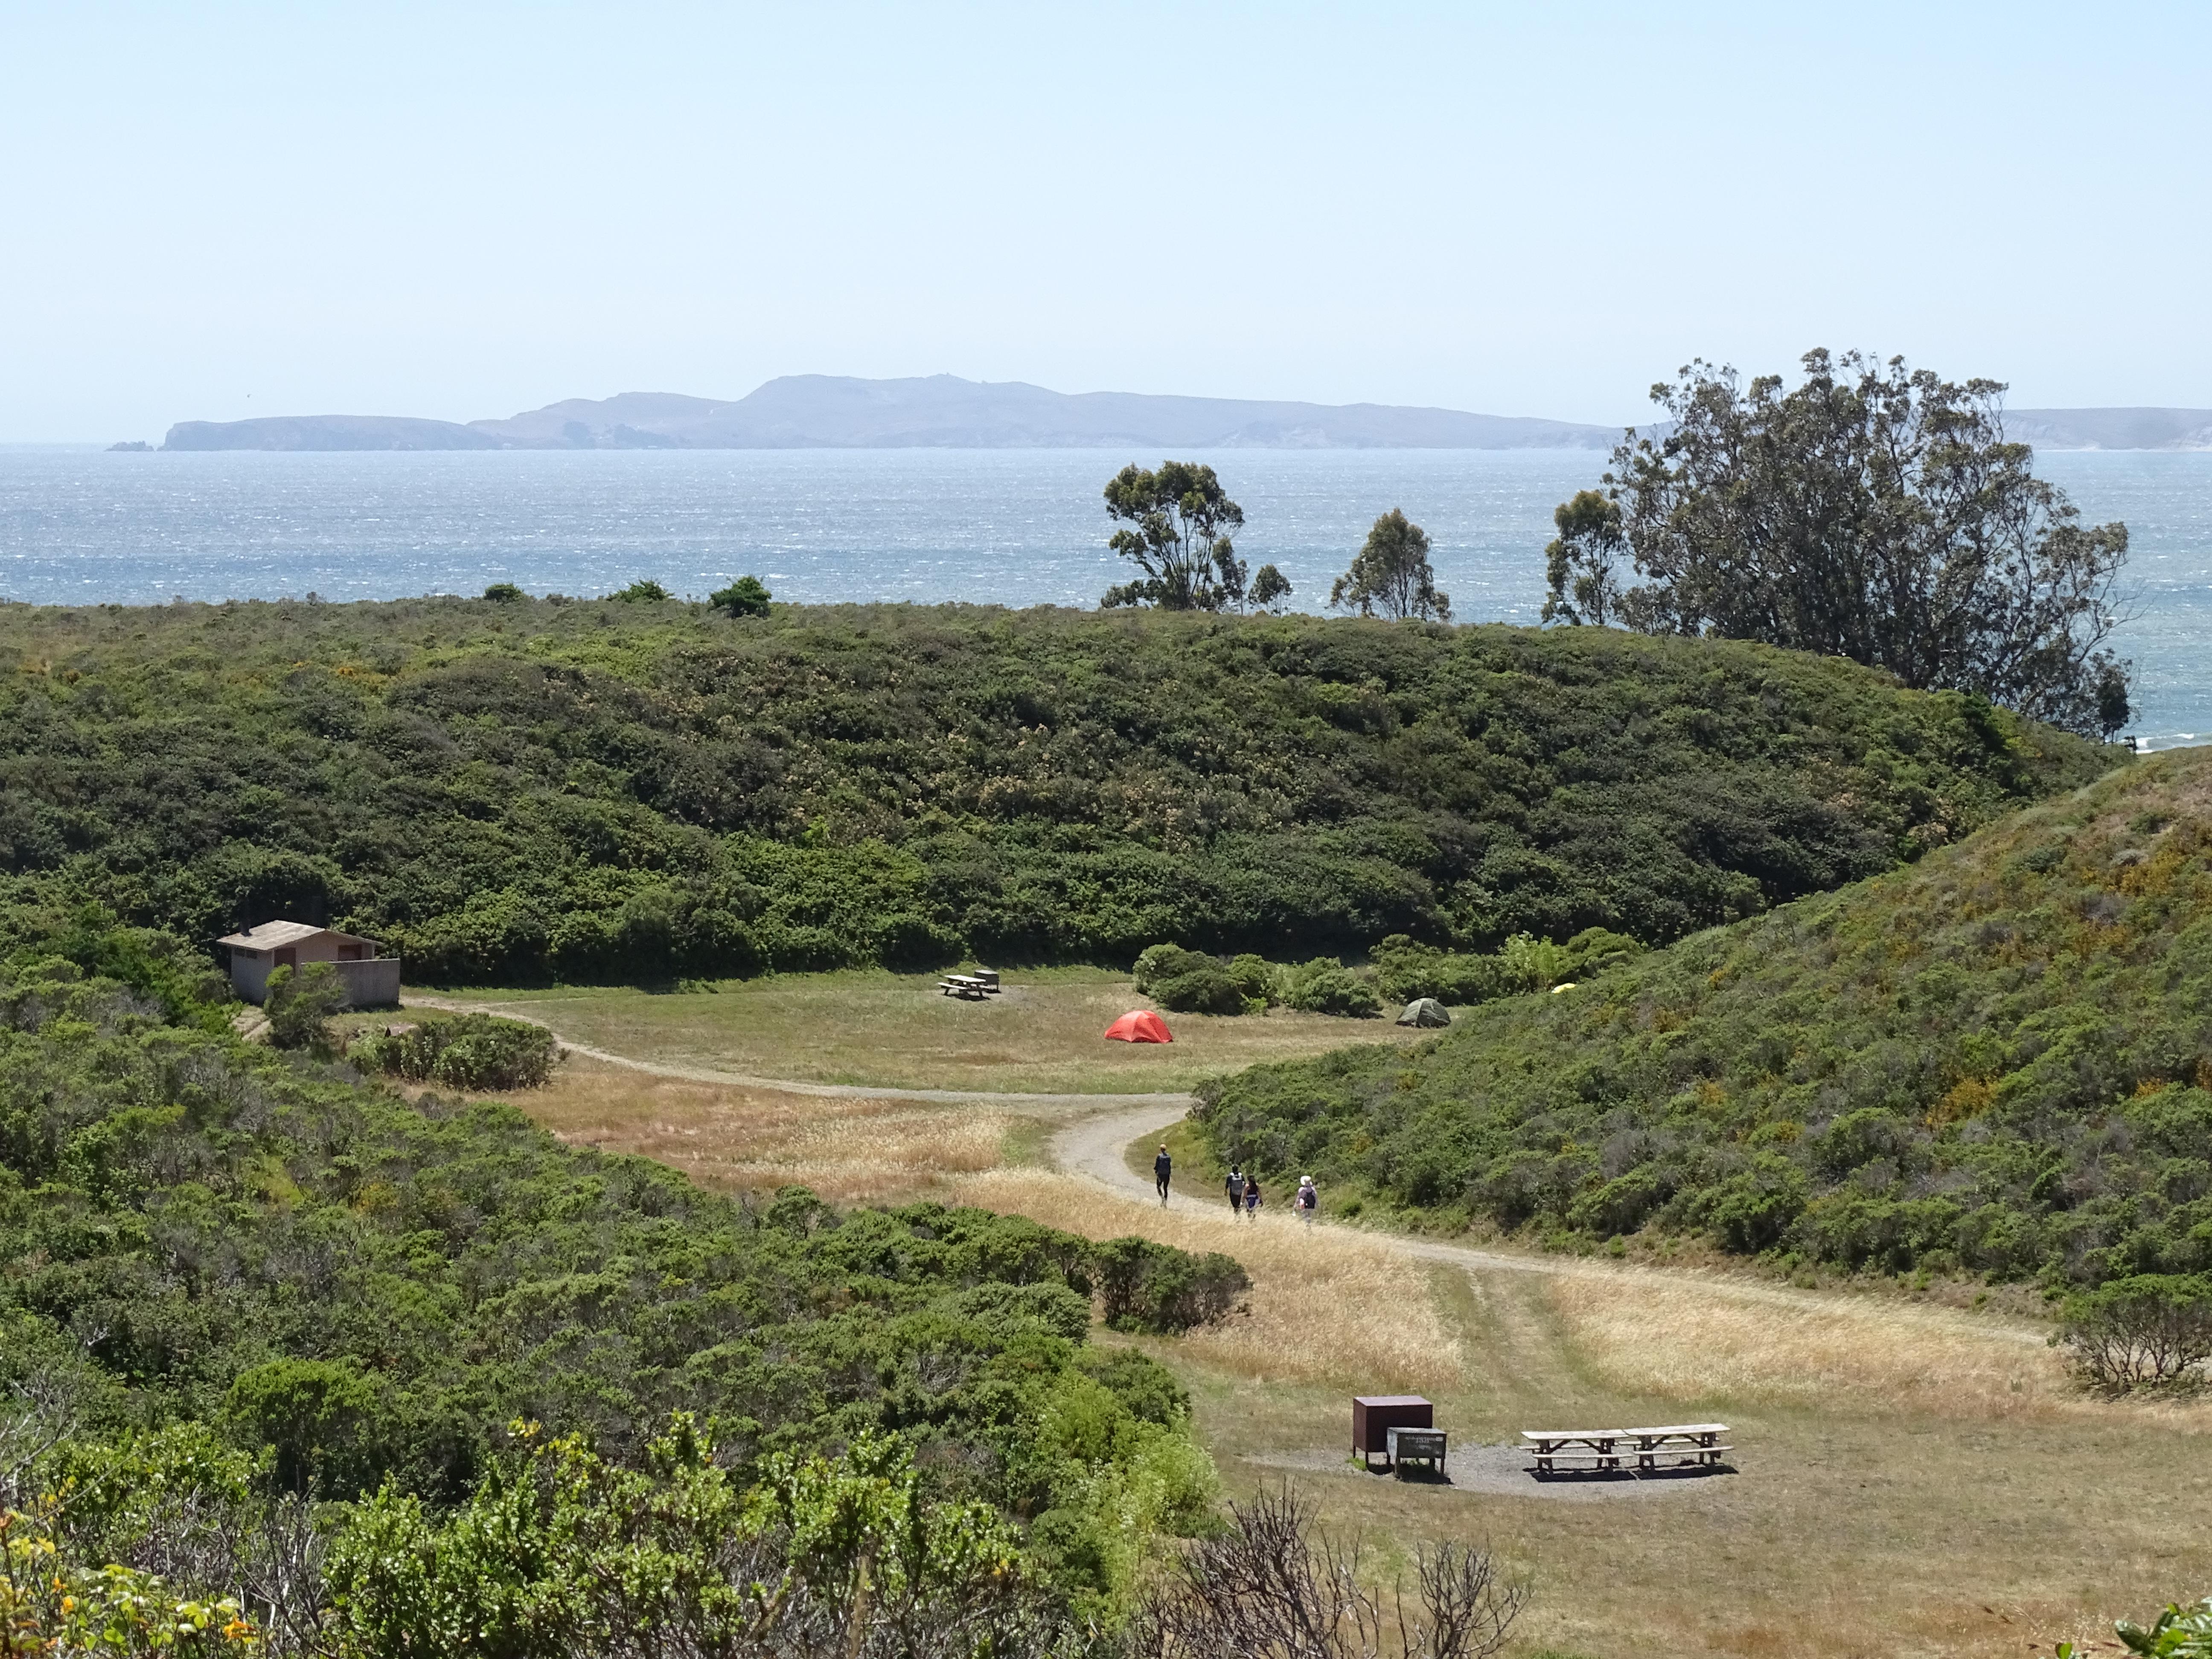 Looking down at a few campsites in a small grassy seaside valley surrounded by shrub-covered hills.